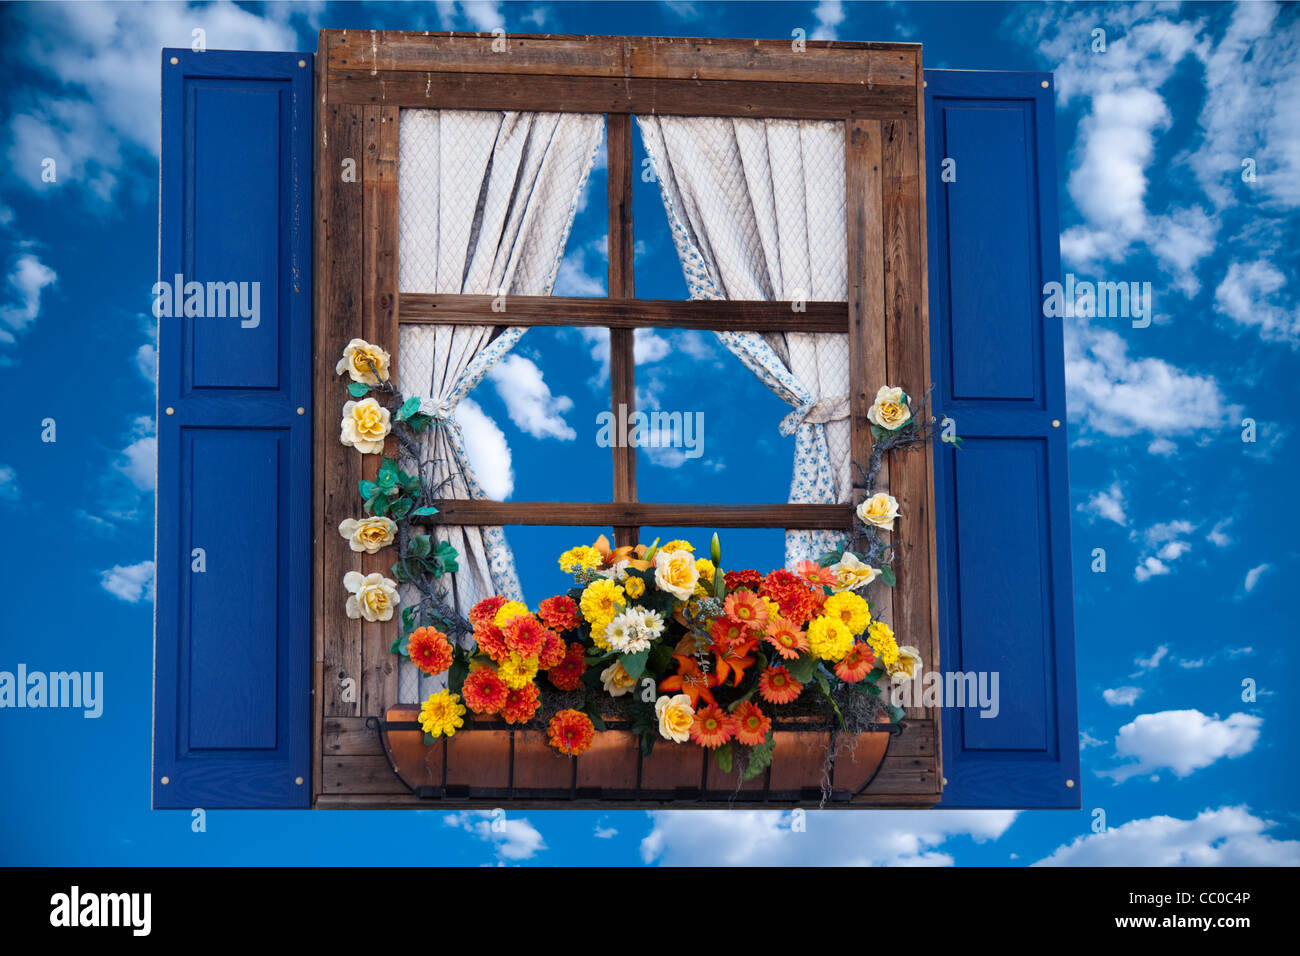 Country style window with flowers,planter, shutters and curtains,sky Stock Photo